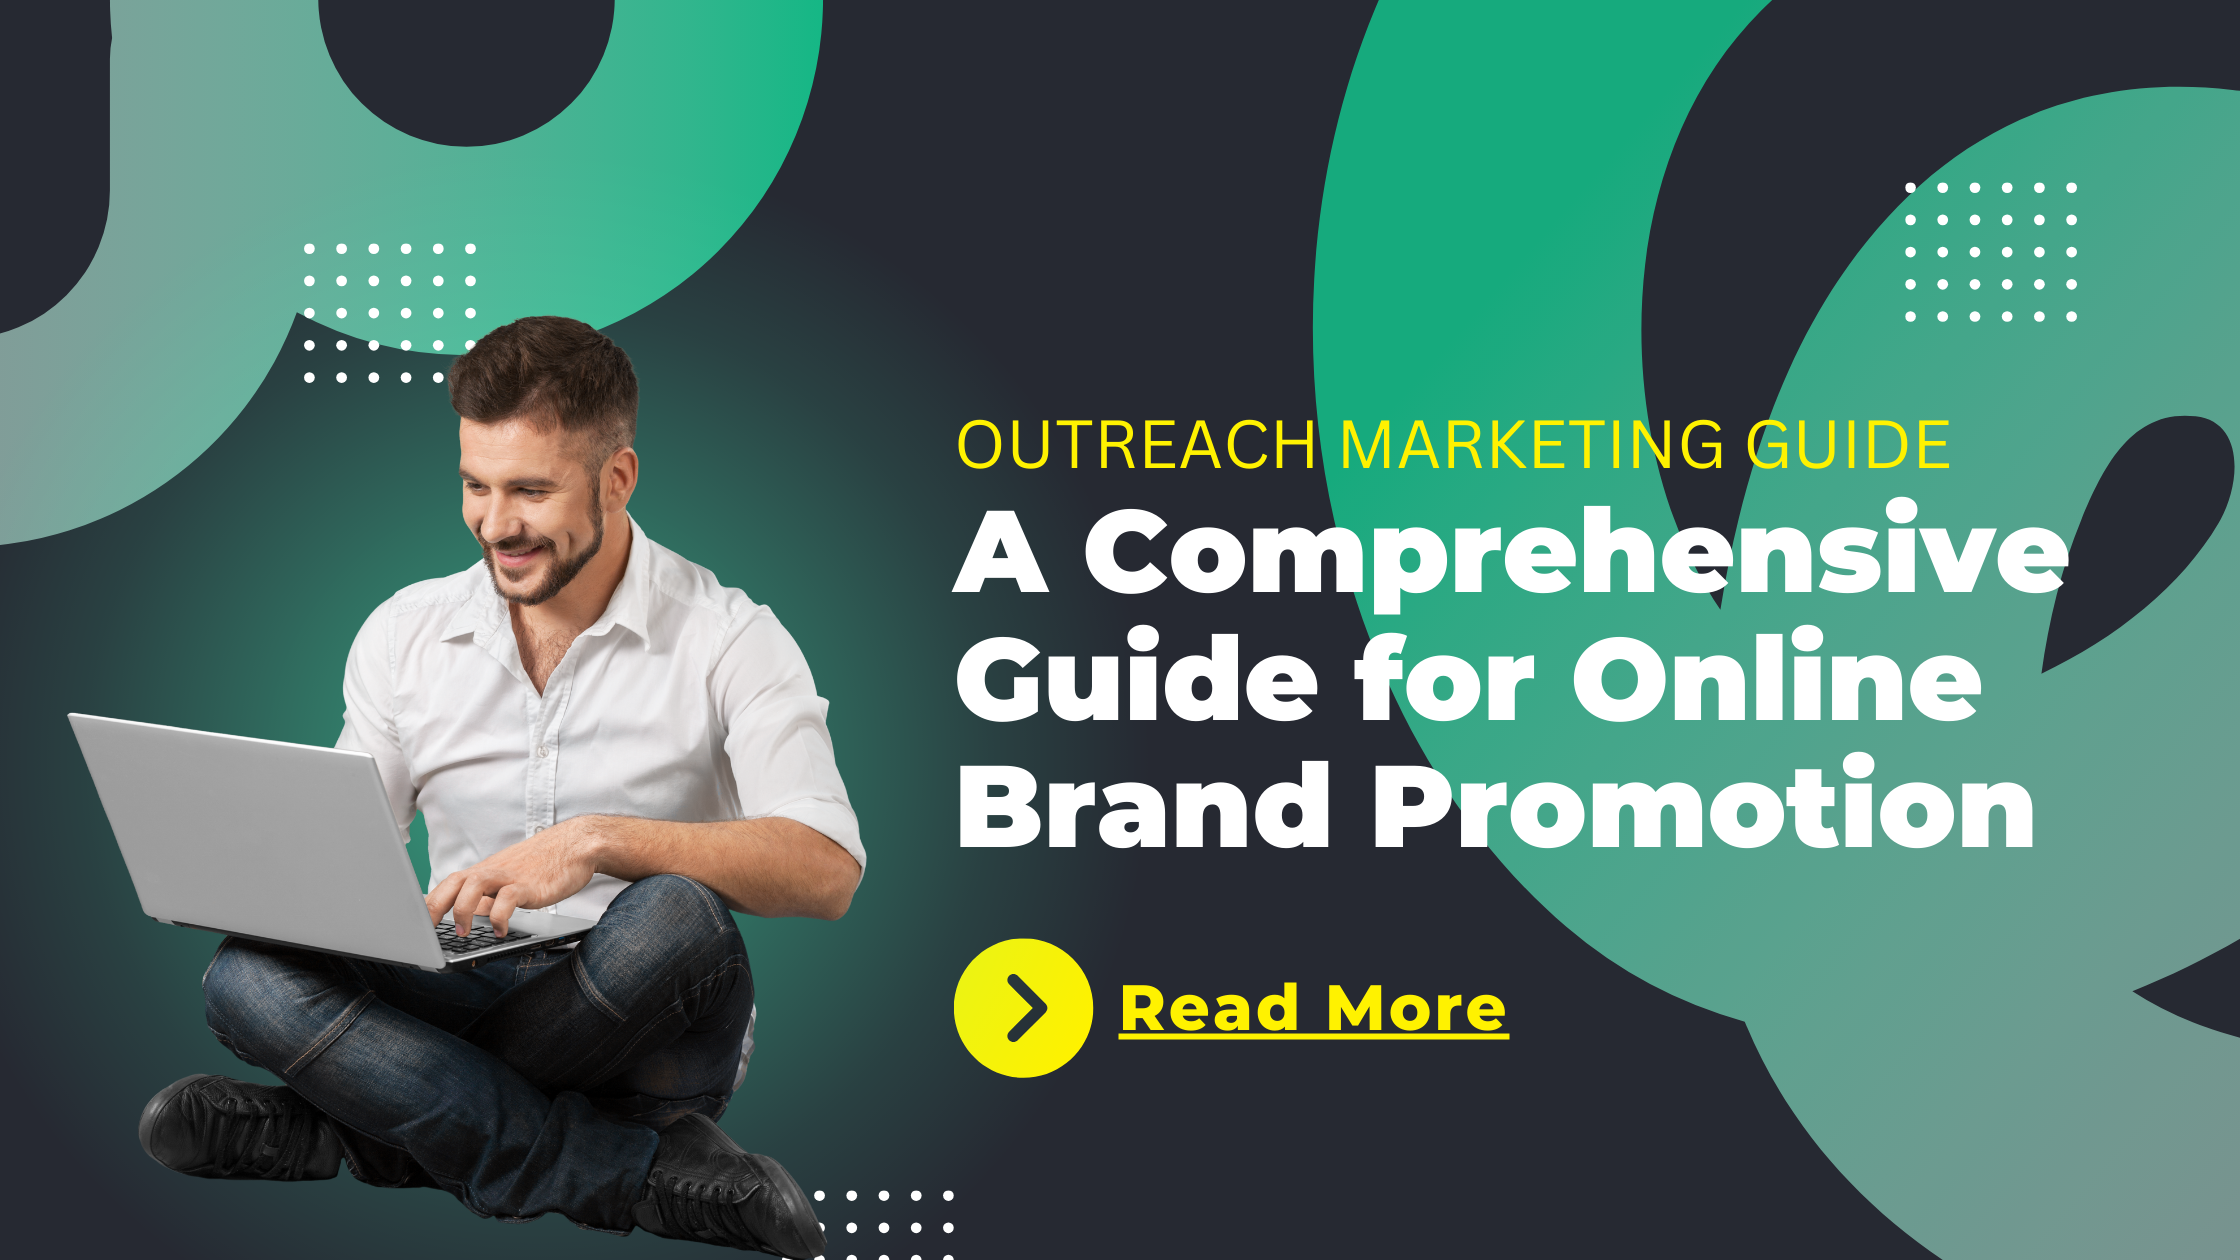 Outreach Marketing Guide: A Comprehensive Guide for Online Brand Promotion